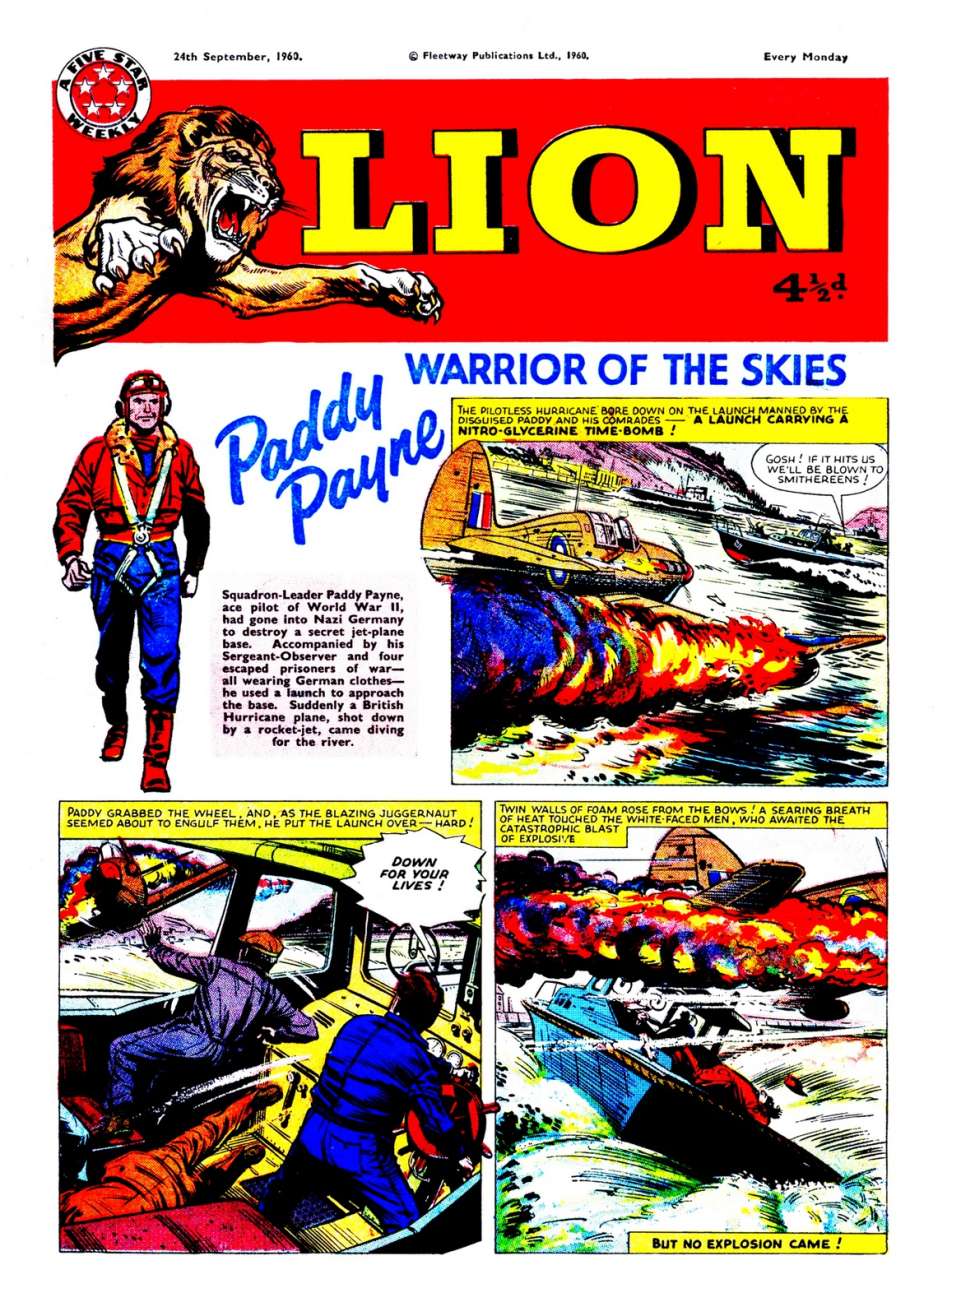 Comic Book Cover For Lion 442